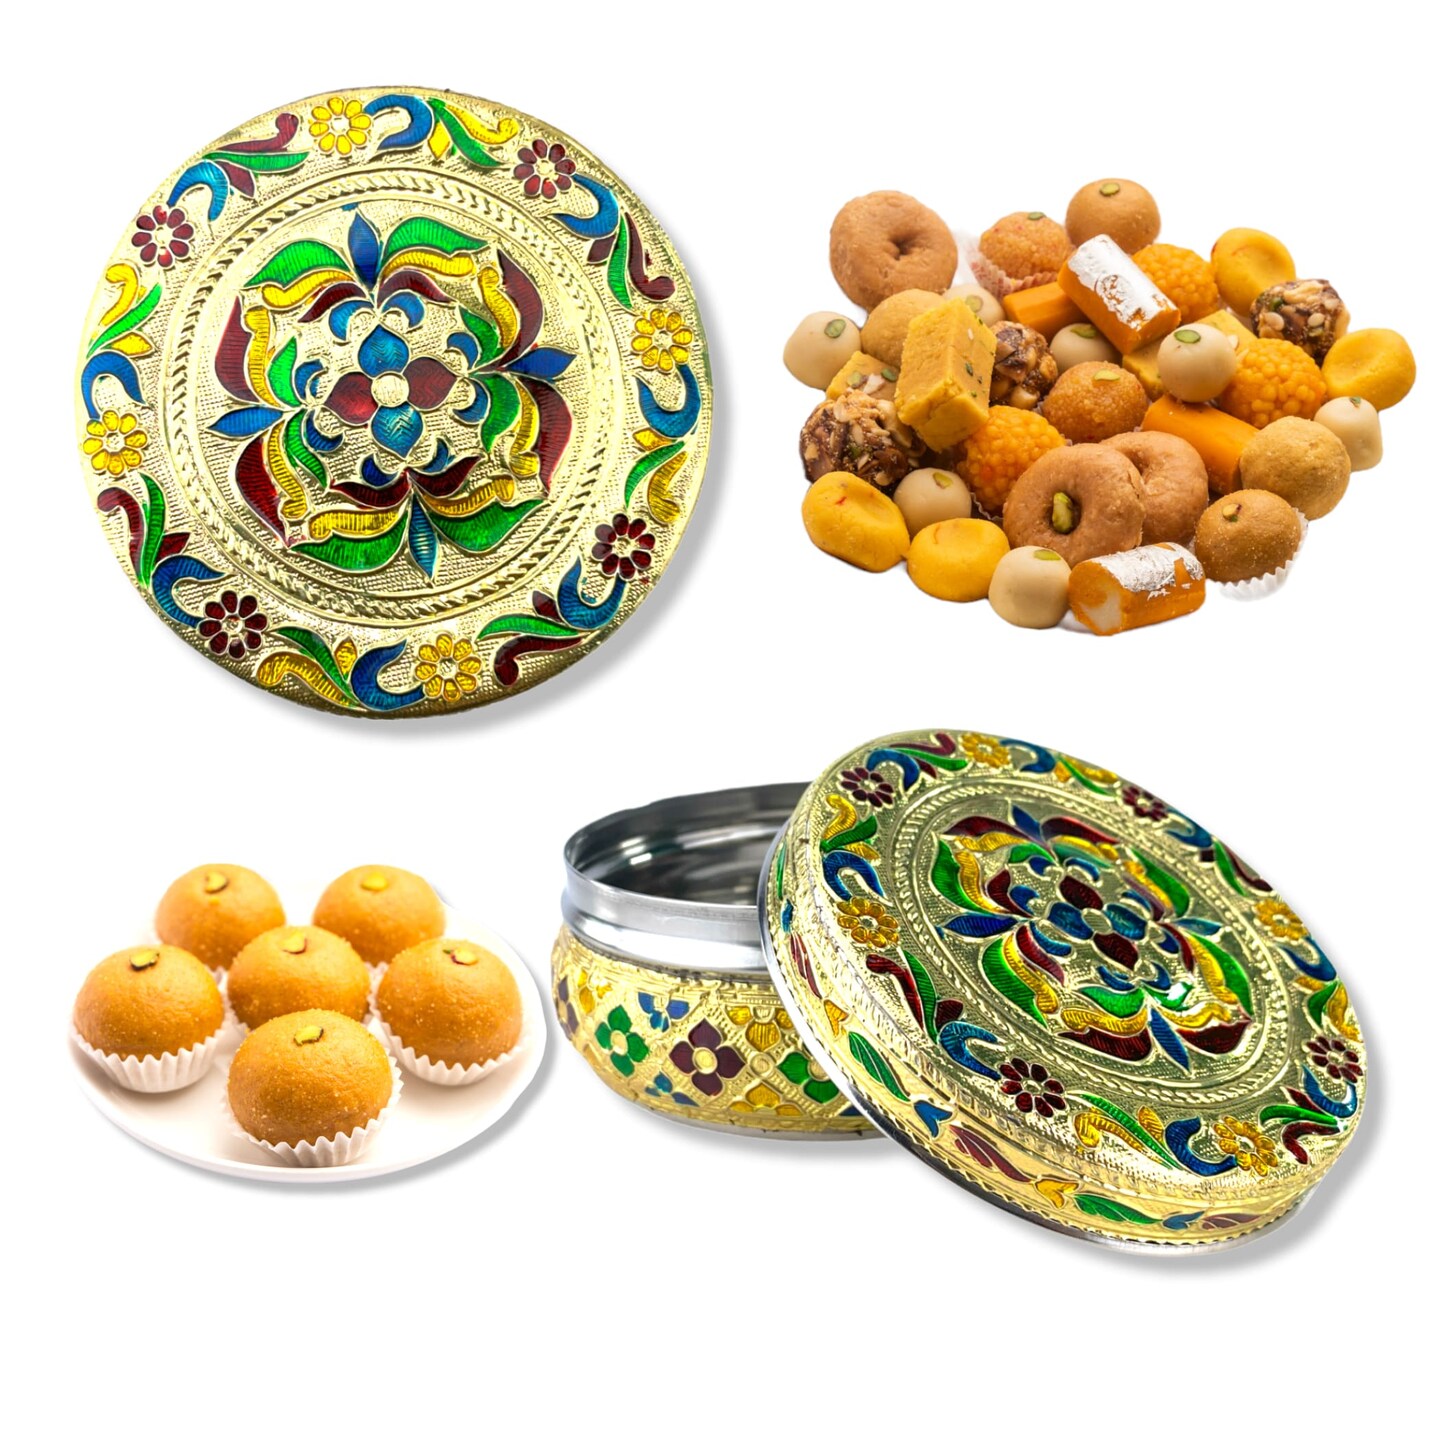 4ct Decorative Sweet Box Stainless Steel Small Round Storage Box Meenakari Container Laddu Box Spice Storage Unique Multipurpose Use Box Gift For Guest